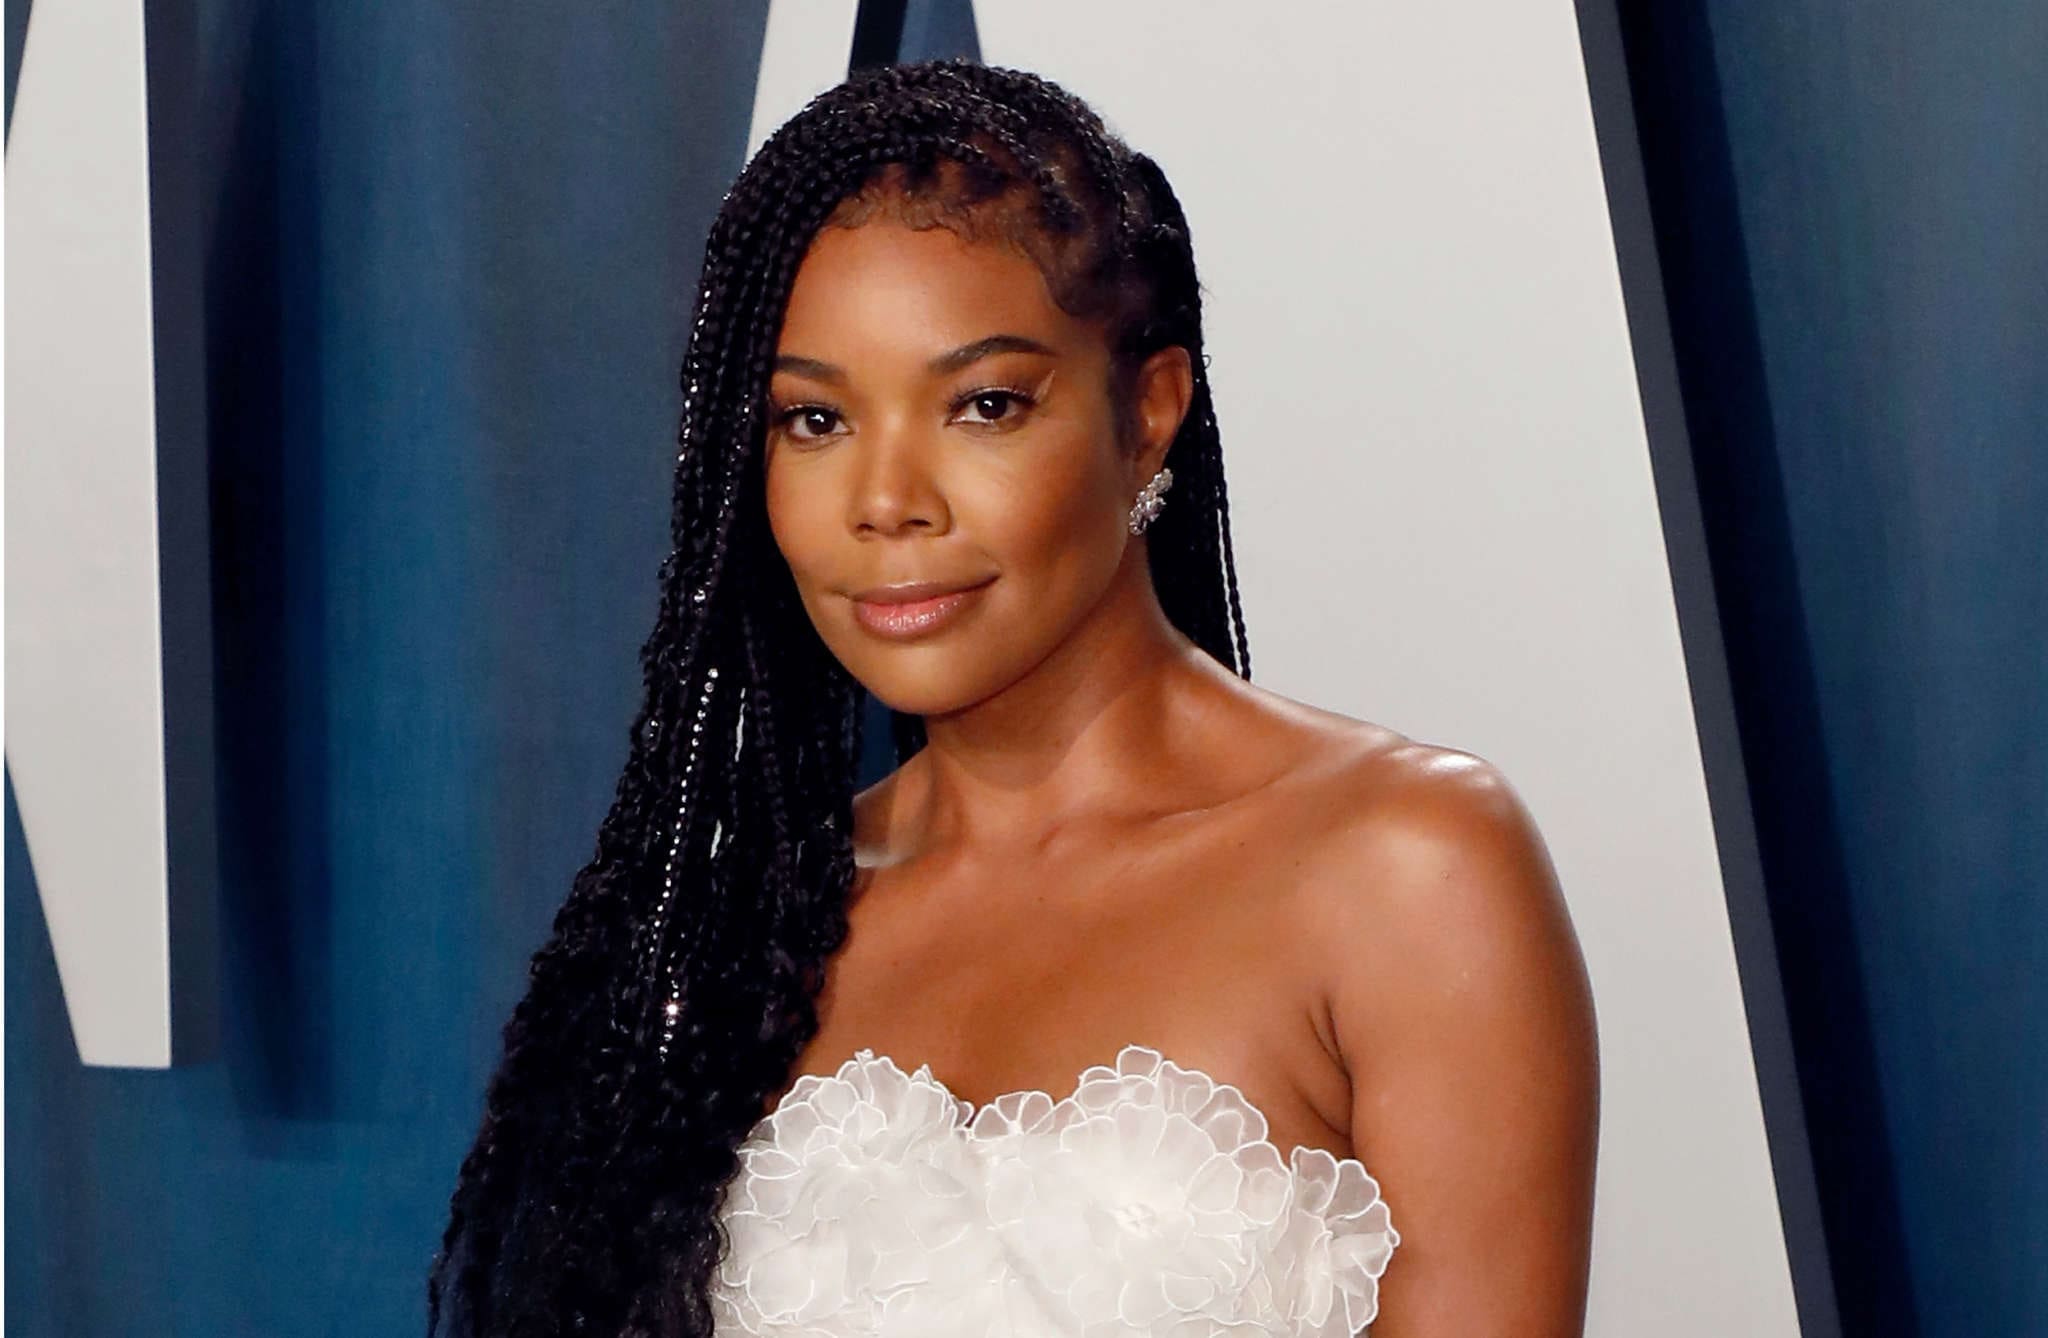 ”gabrielle-union-praises-dionne-warwick-at-the-end-of-2020”